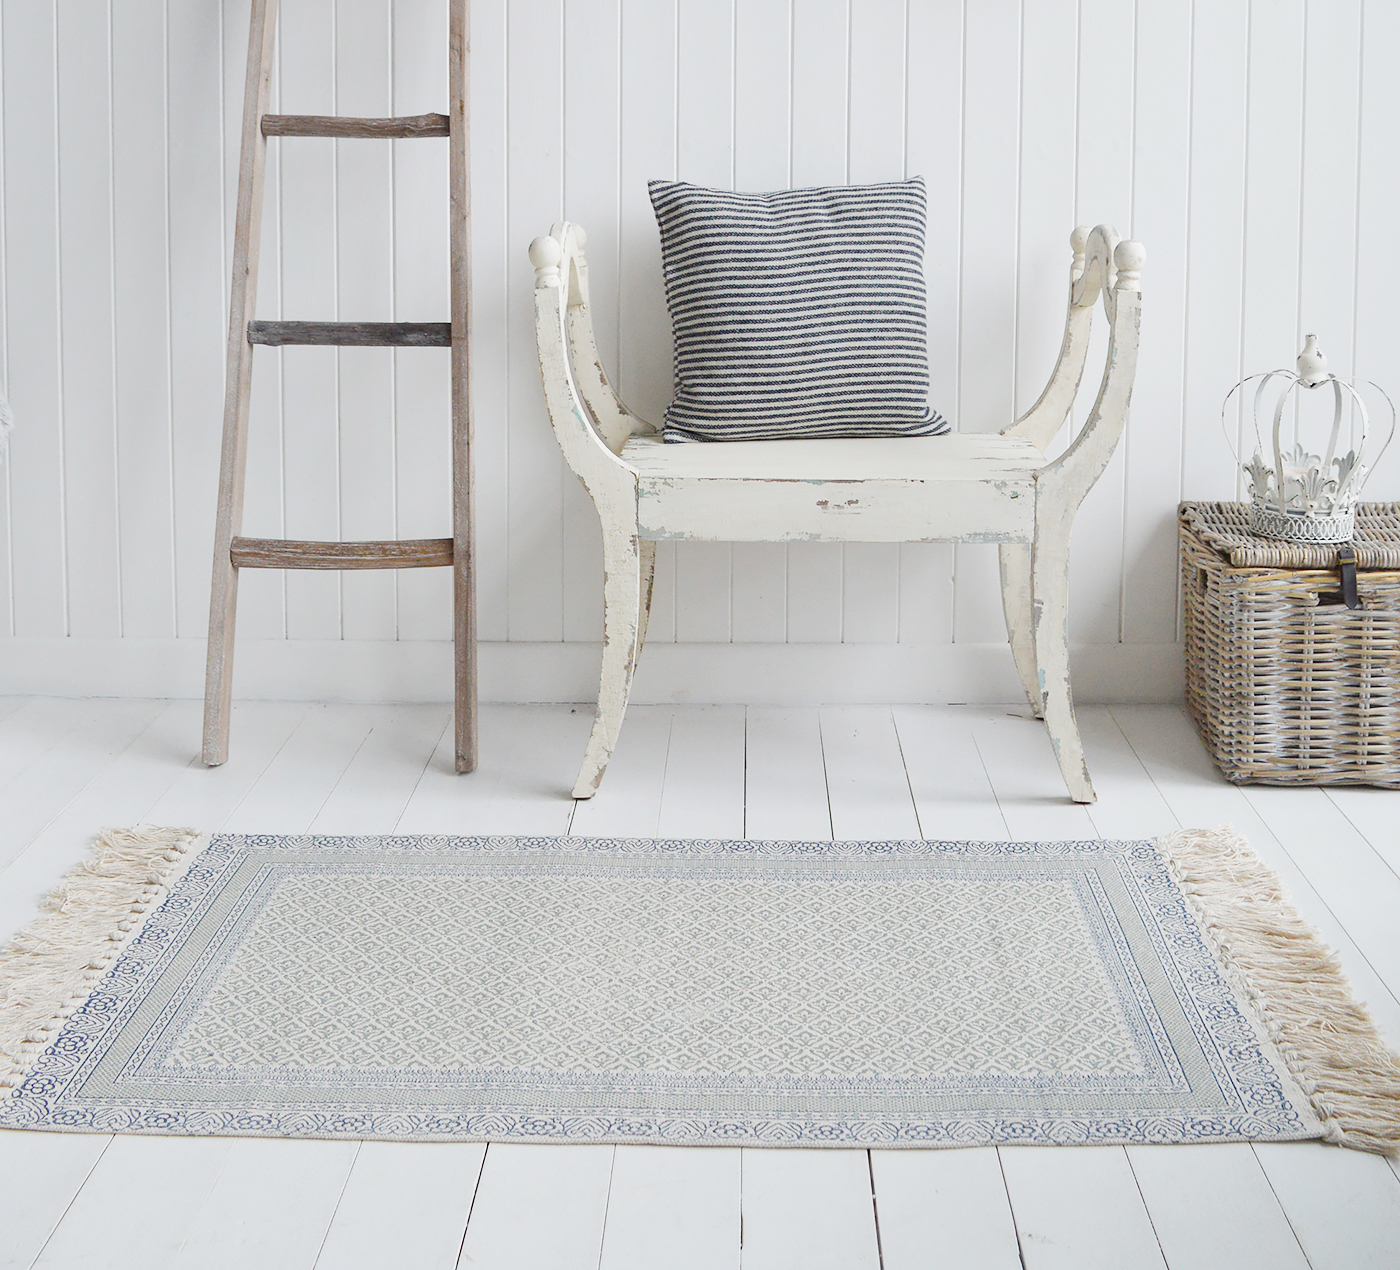 Hampton Rug Floor Navy Grey Linen New England Coastal, Country and City homes - The White Lighthouse Furniture for hallway, living room, bedroom and bathroom